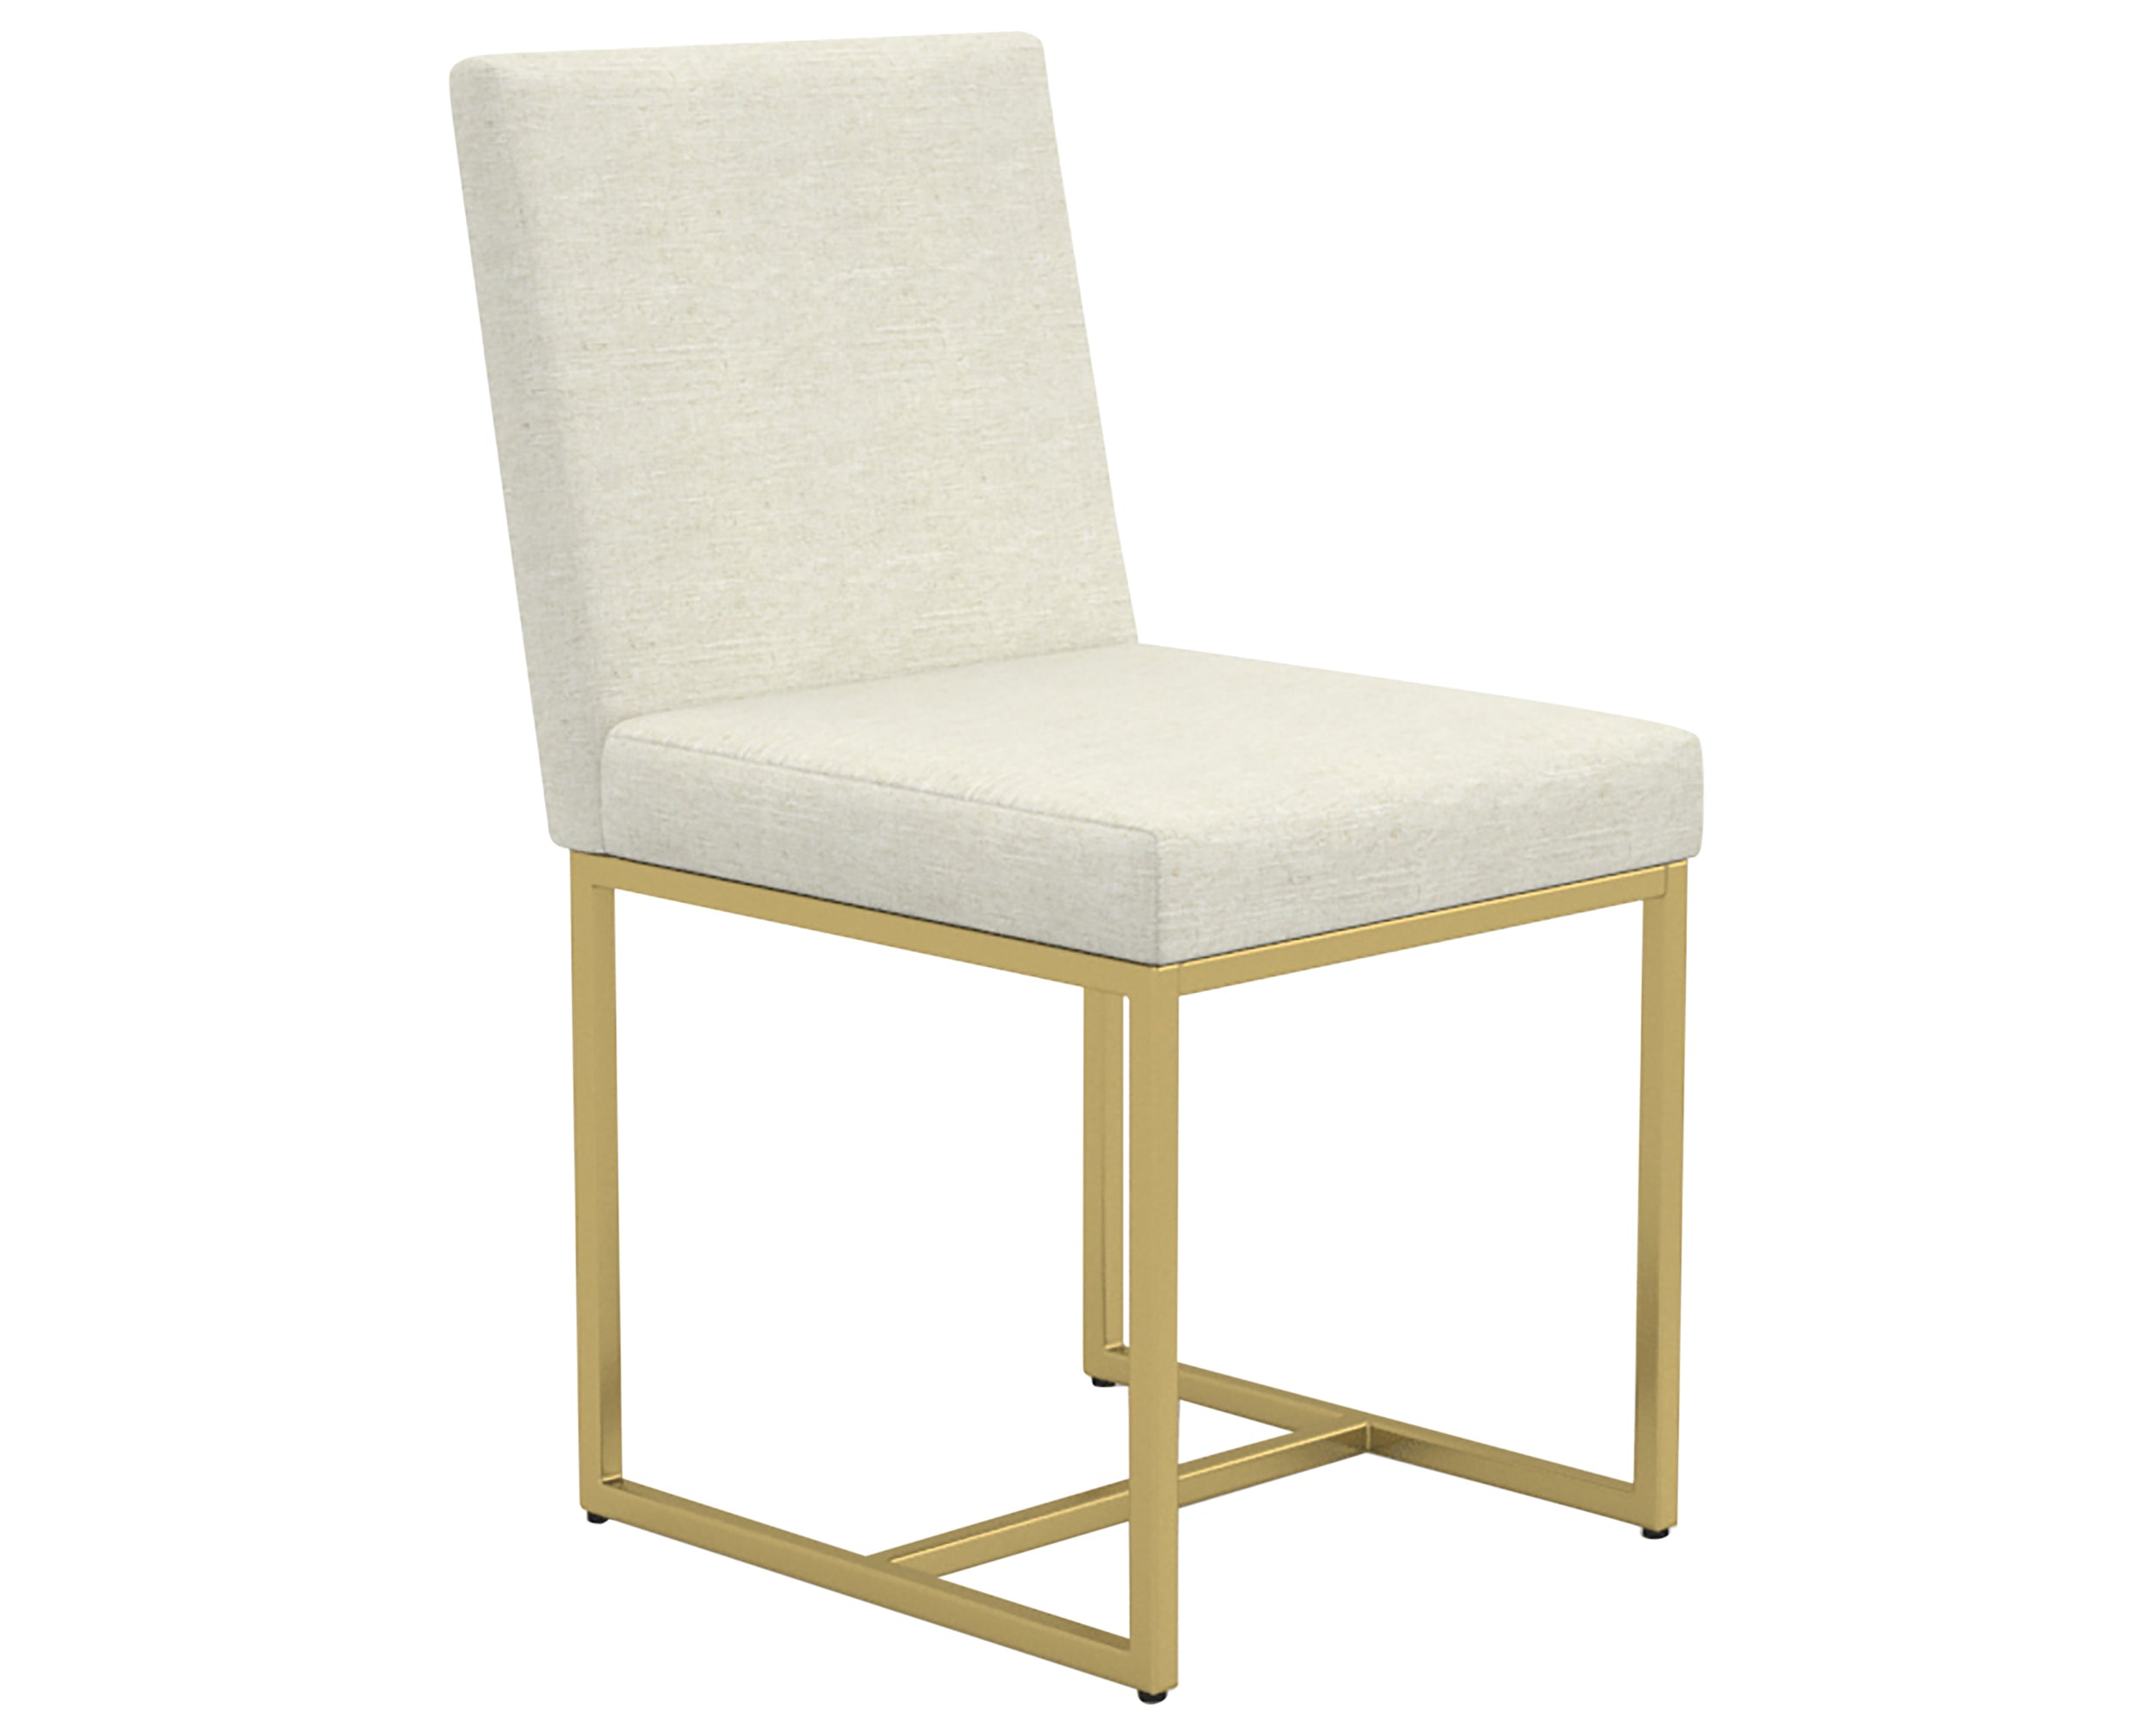 GL Metal Gold &amp; Fabric TW | Canadel Modern Dining Chair 5174 | Valley Ridge Furniture